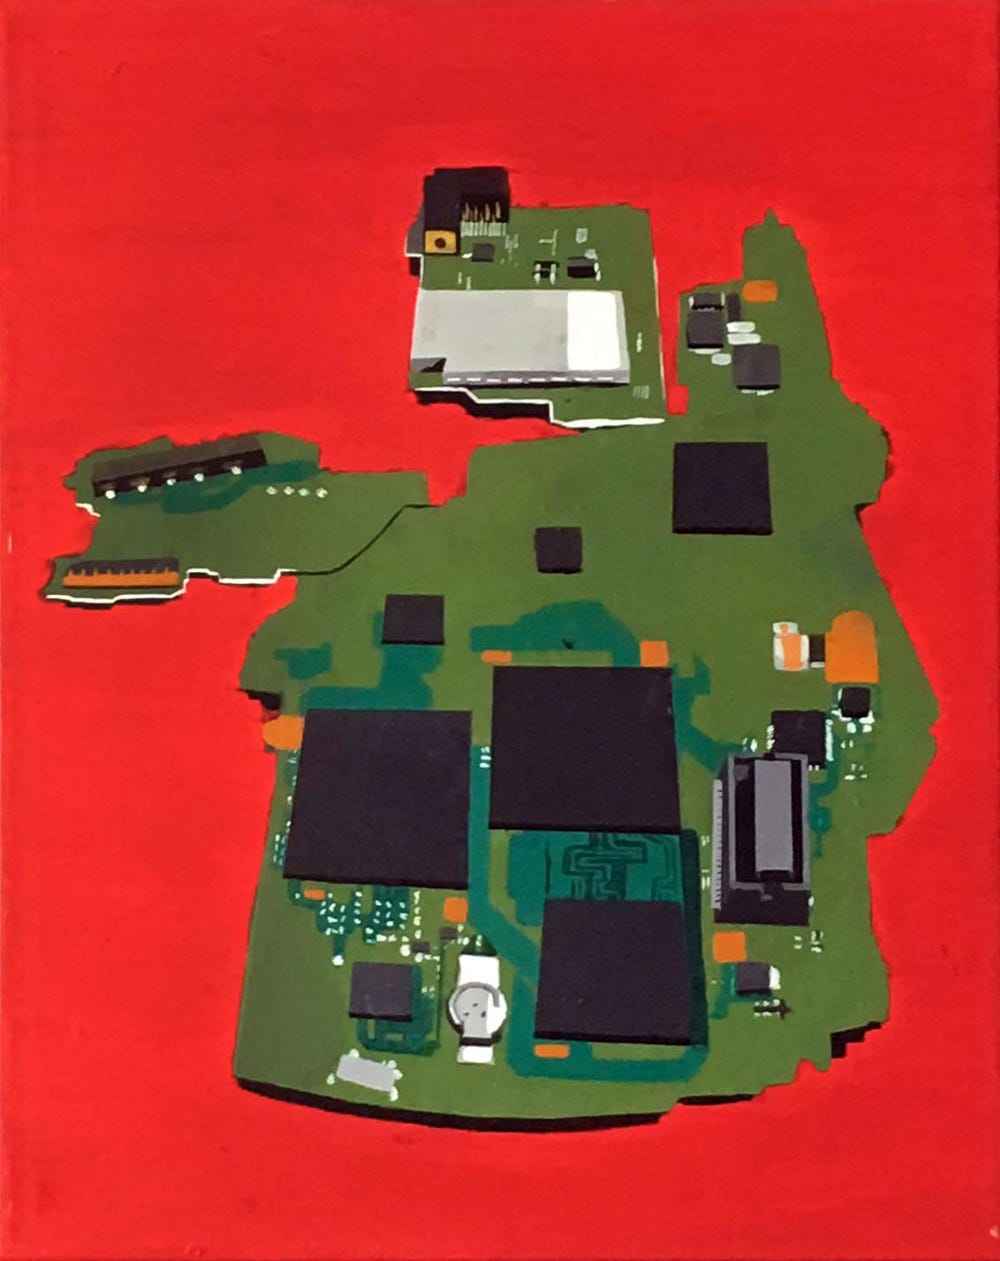 green computer circuit board on red background